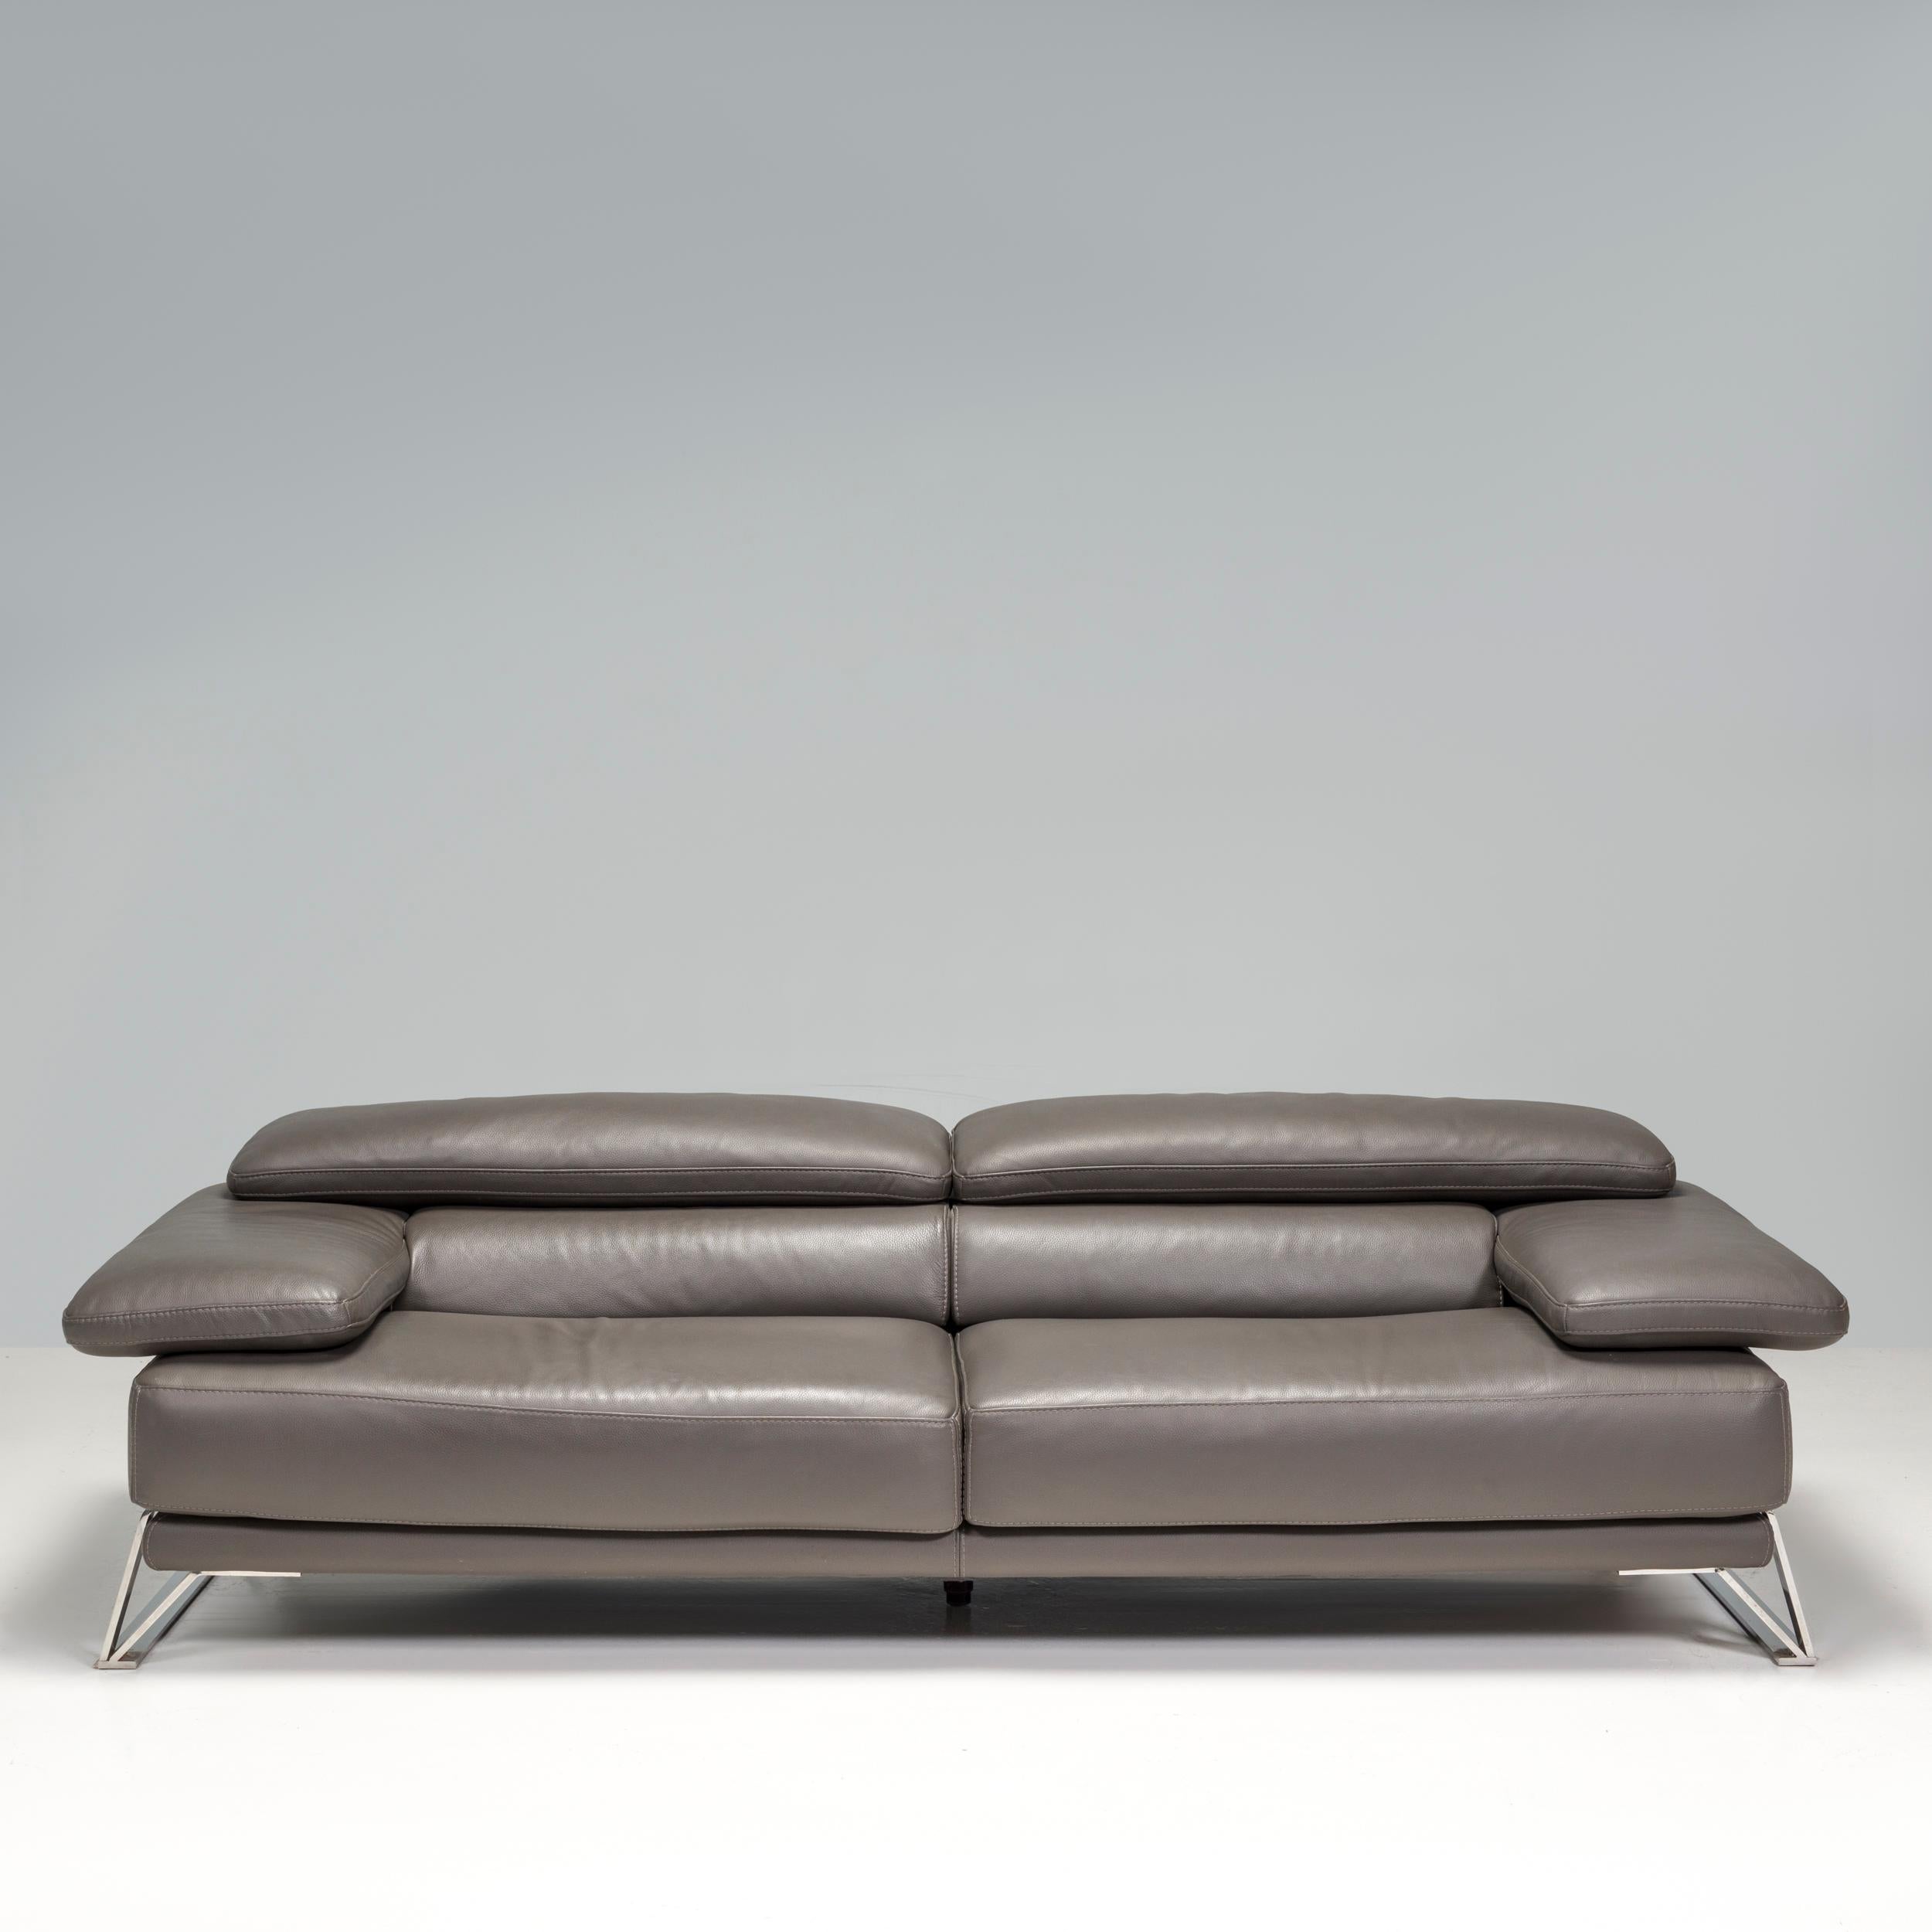 Designed and manufactured by Roche Bobois, this sofa is the perfect balance of comfort and style.

Featuring polished chrome sled legs, the sofa has contrasting grey leather with adjustable back rests.

Upholstered in soft grey leather, the sofa has